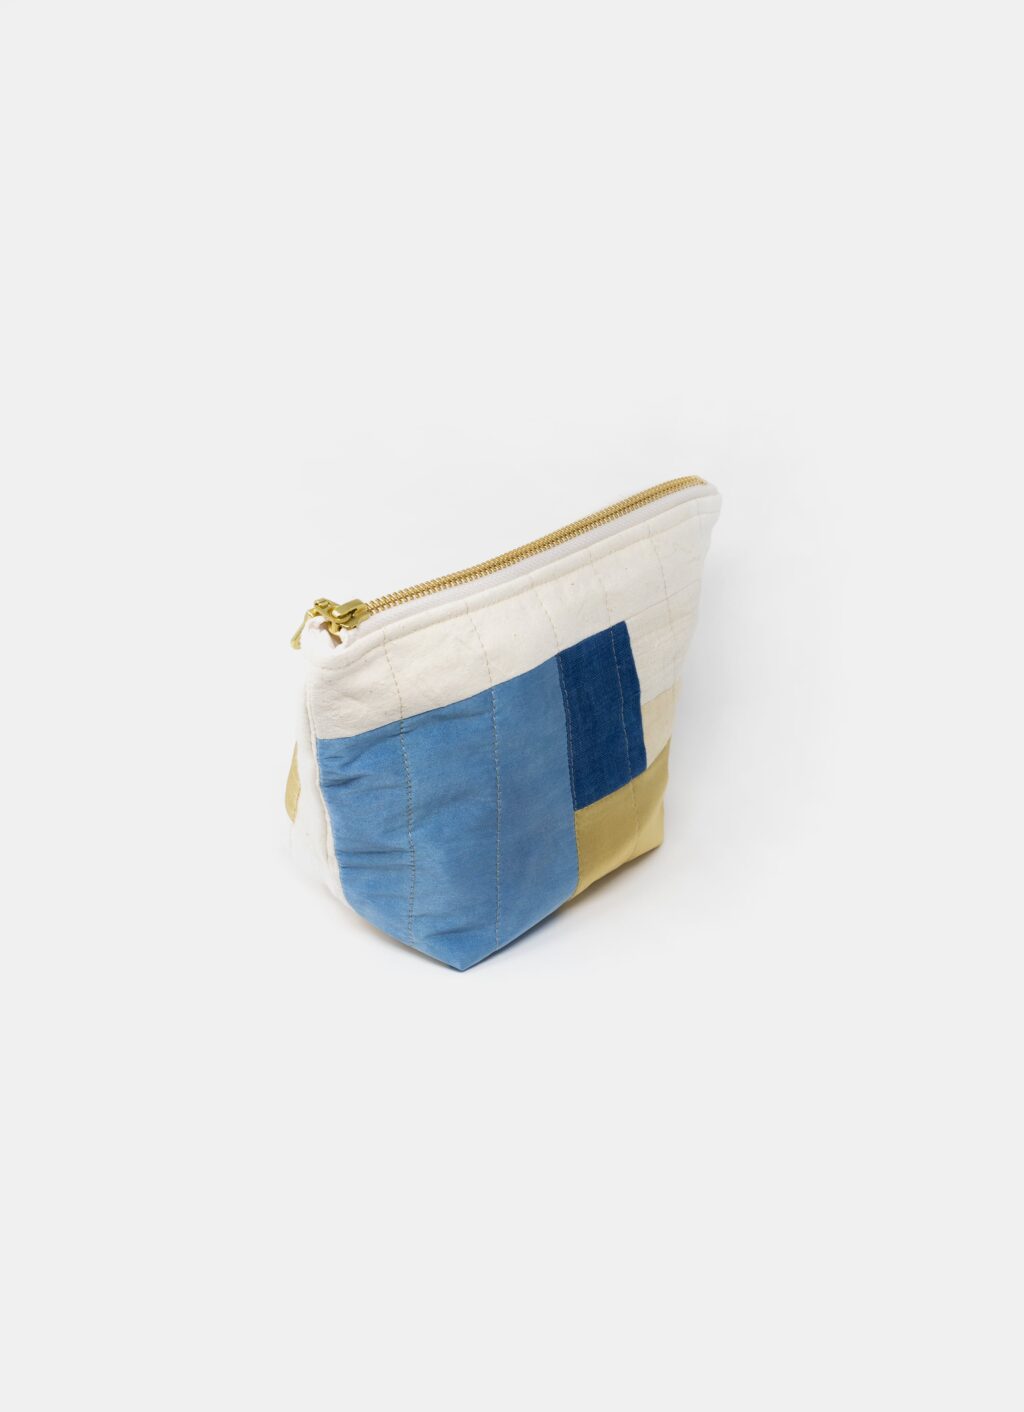 Marram - Patchwork Zipper Pouch - Plant dyed - Meadows collection - Indigo and neutral tones